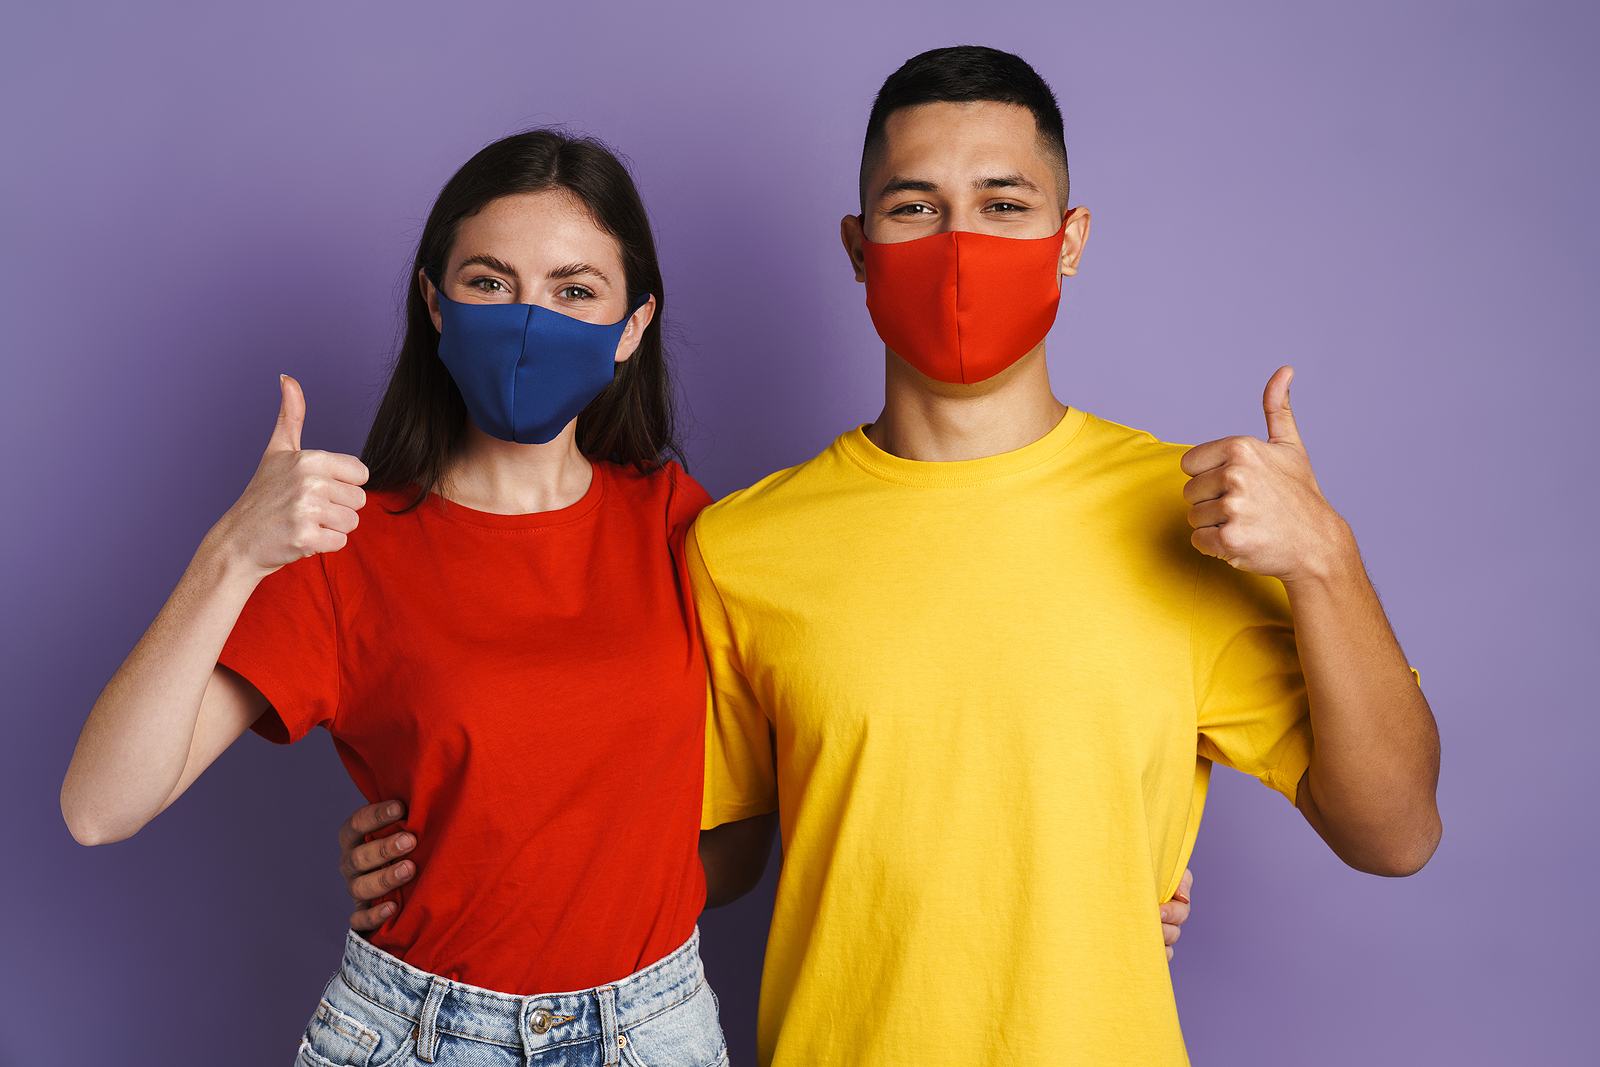 A man and woman smile with face masks on while giving a thumbs up.